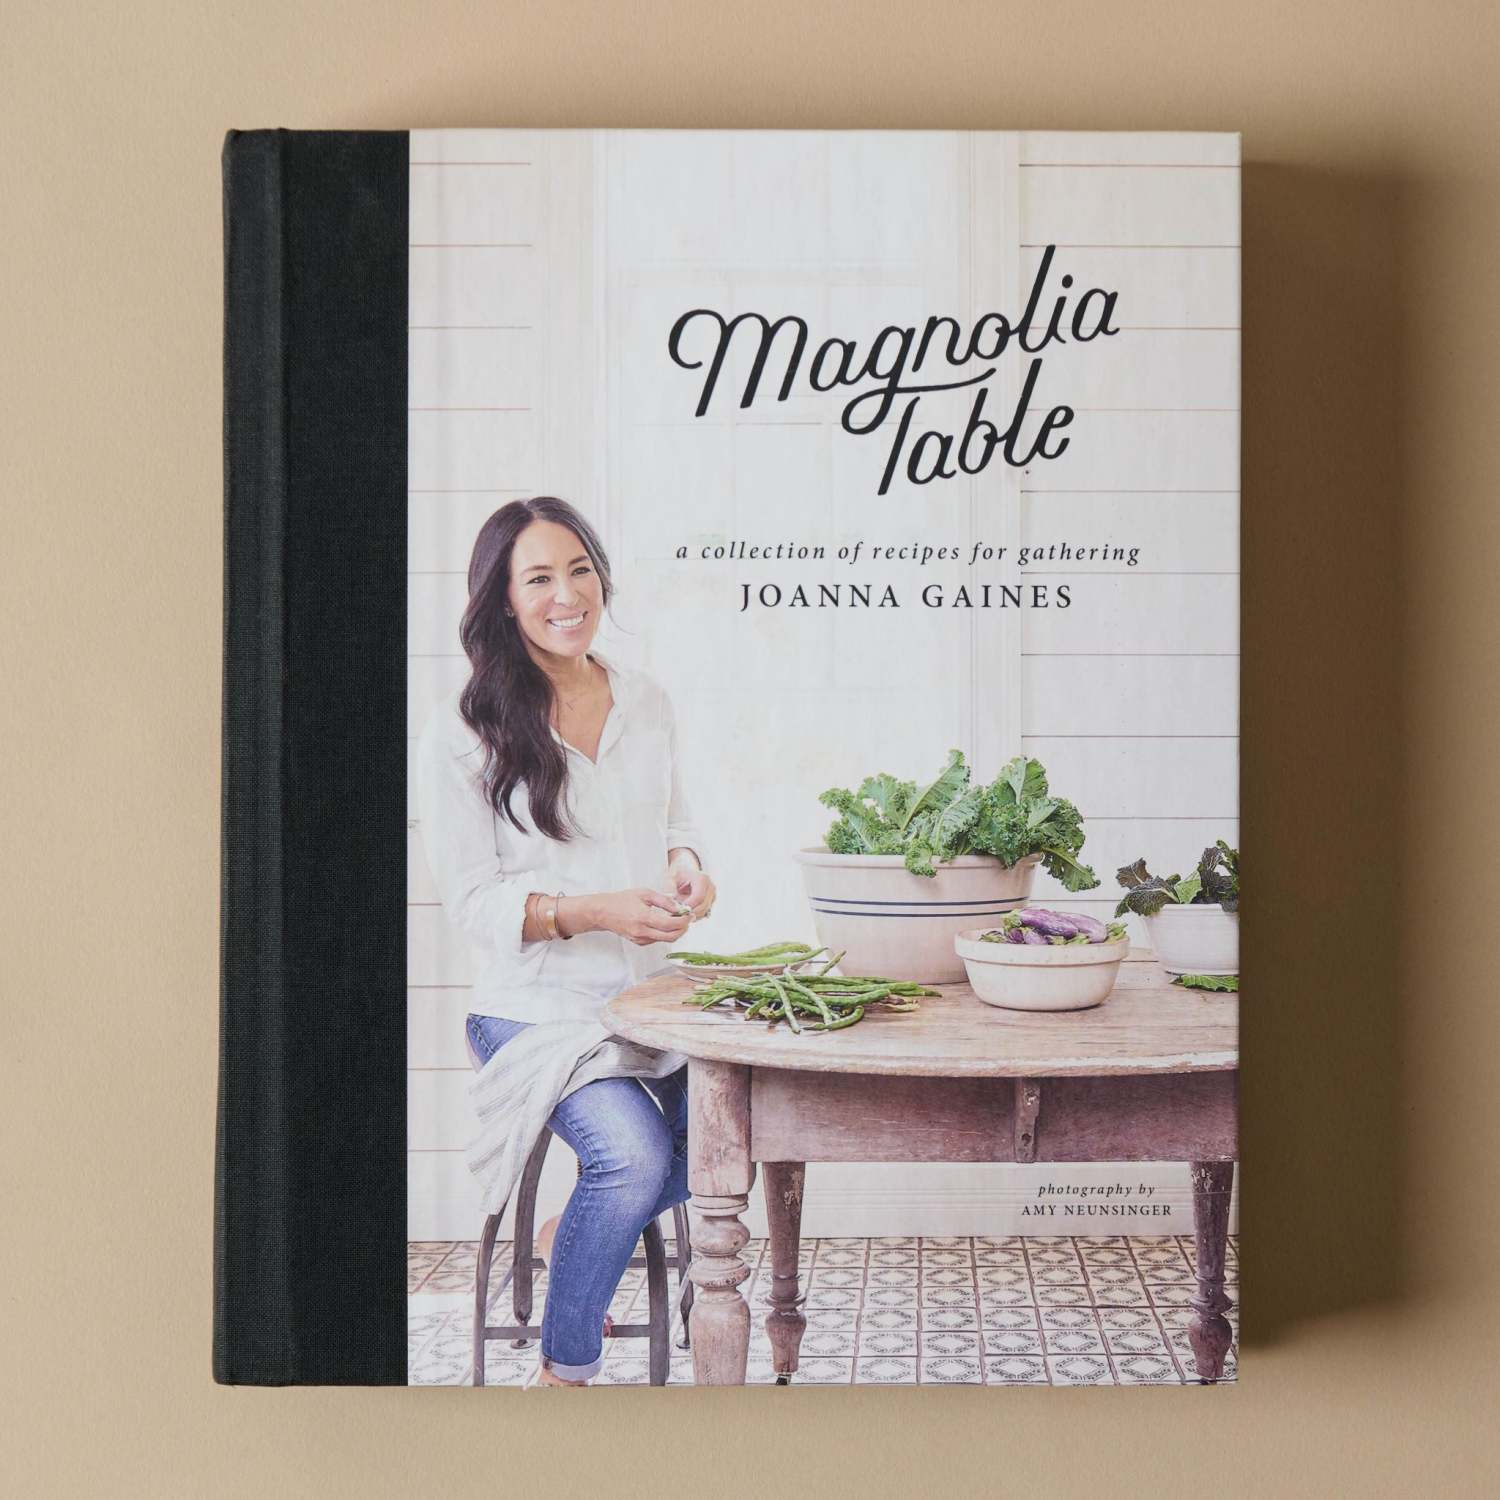 Shop Magnolia Table from Amazon on Openhaus